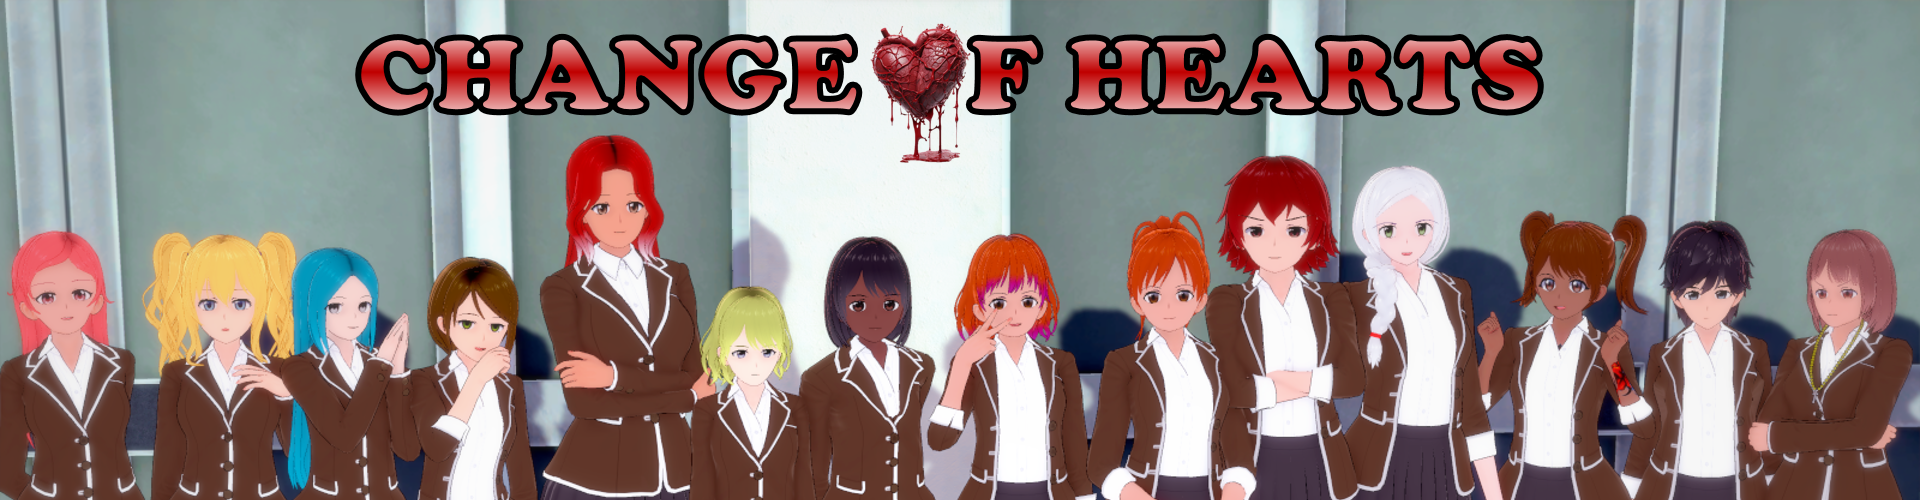 Change of Hearts poster